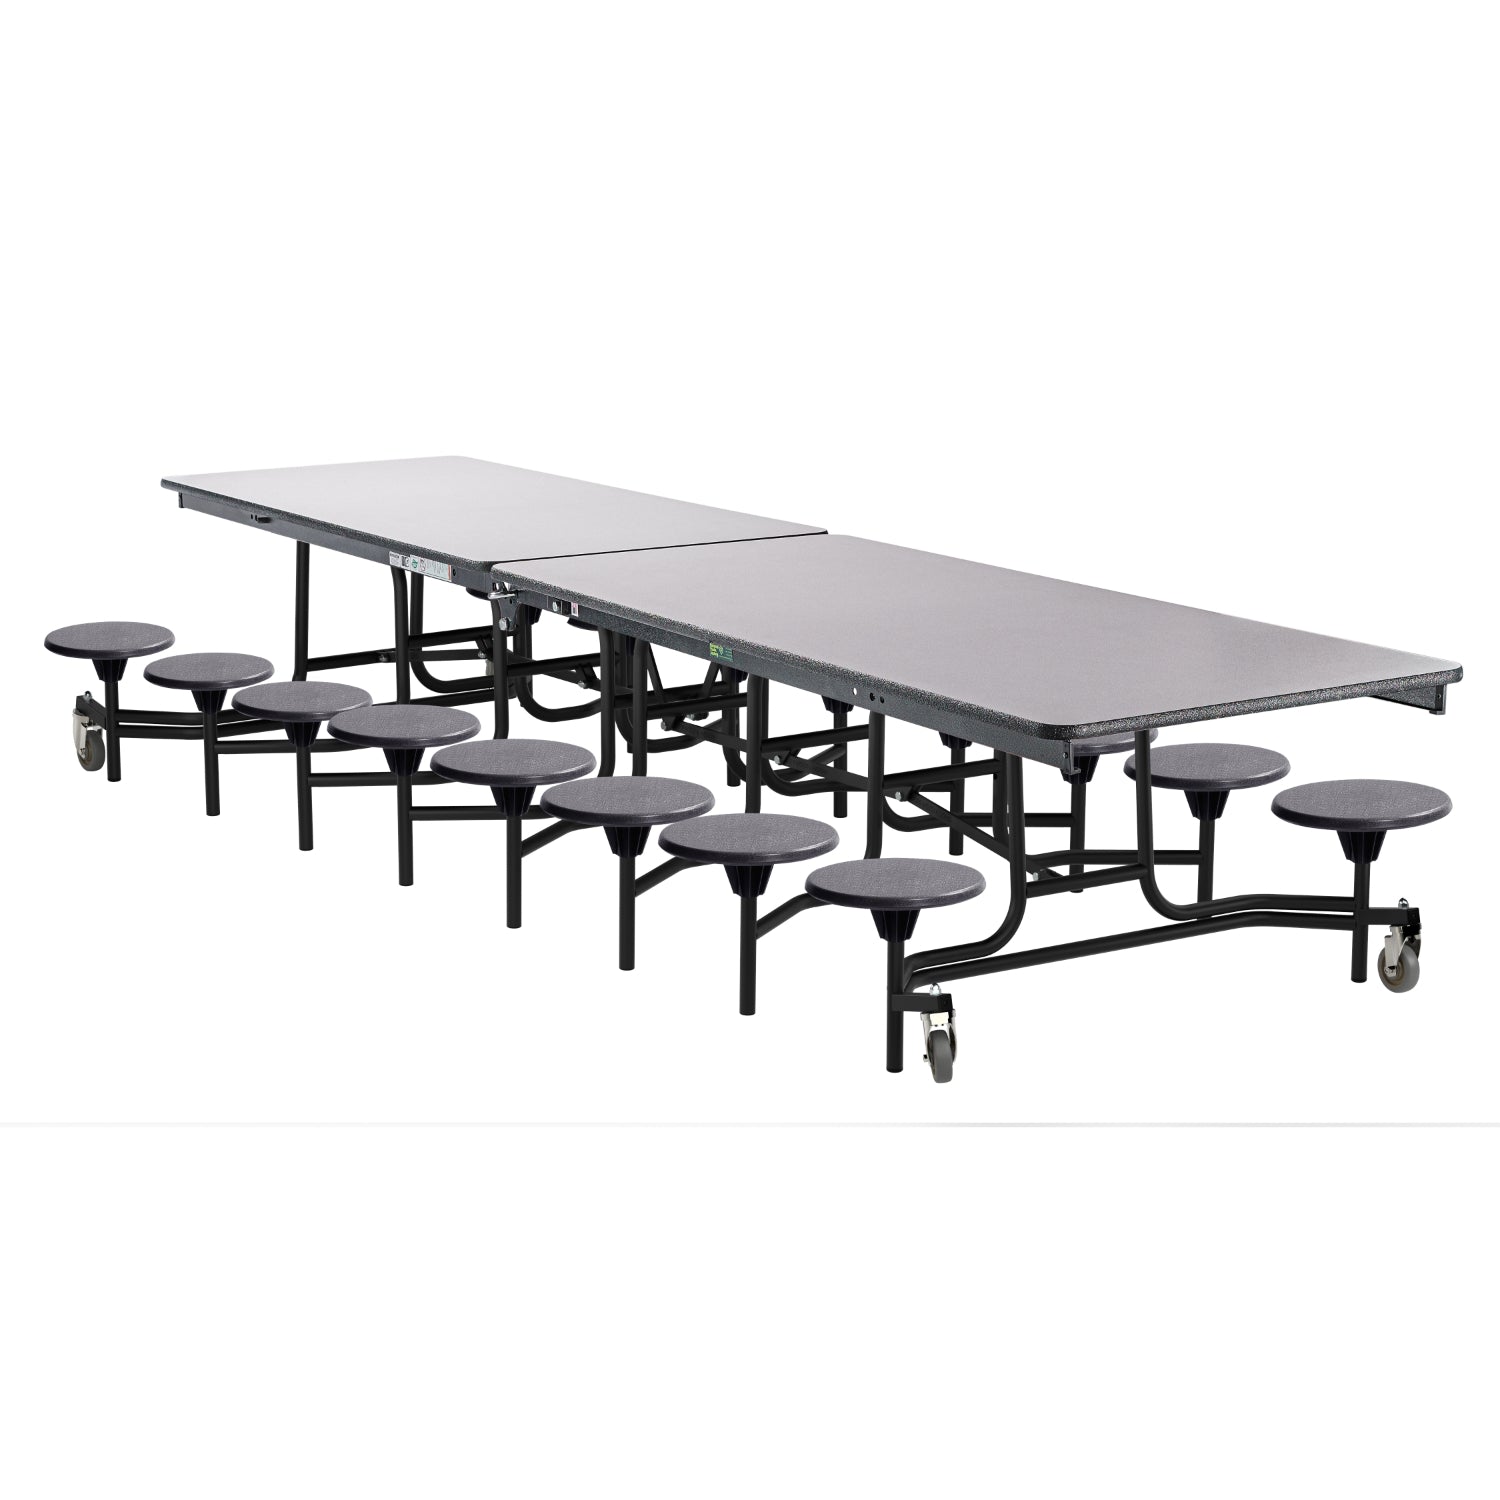 Mobile Cafeteria Table with 16 Stools, 12'L Rectangular, Plywood Core, Vinyl T-Mold Edge, Textured Black Frame